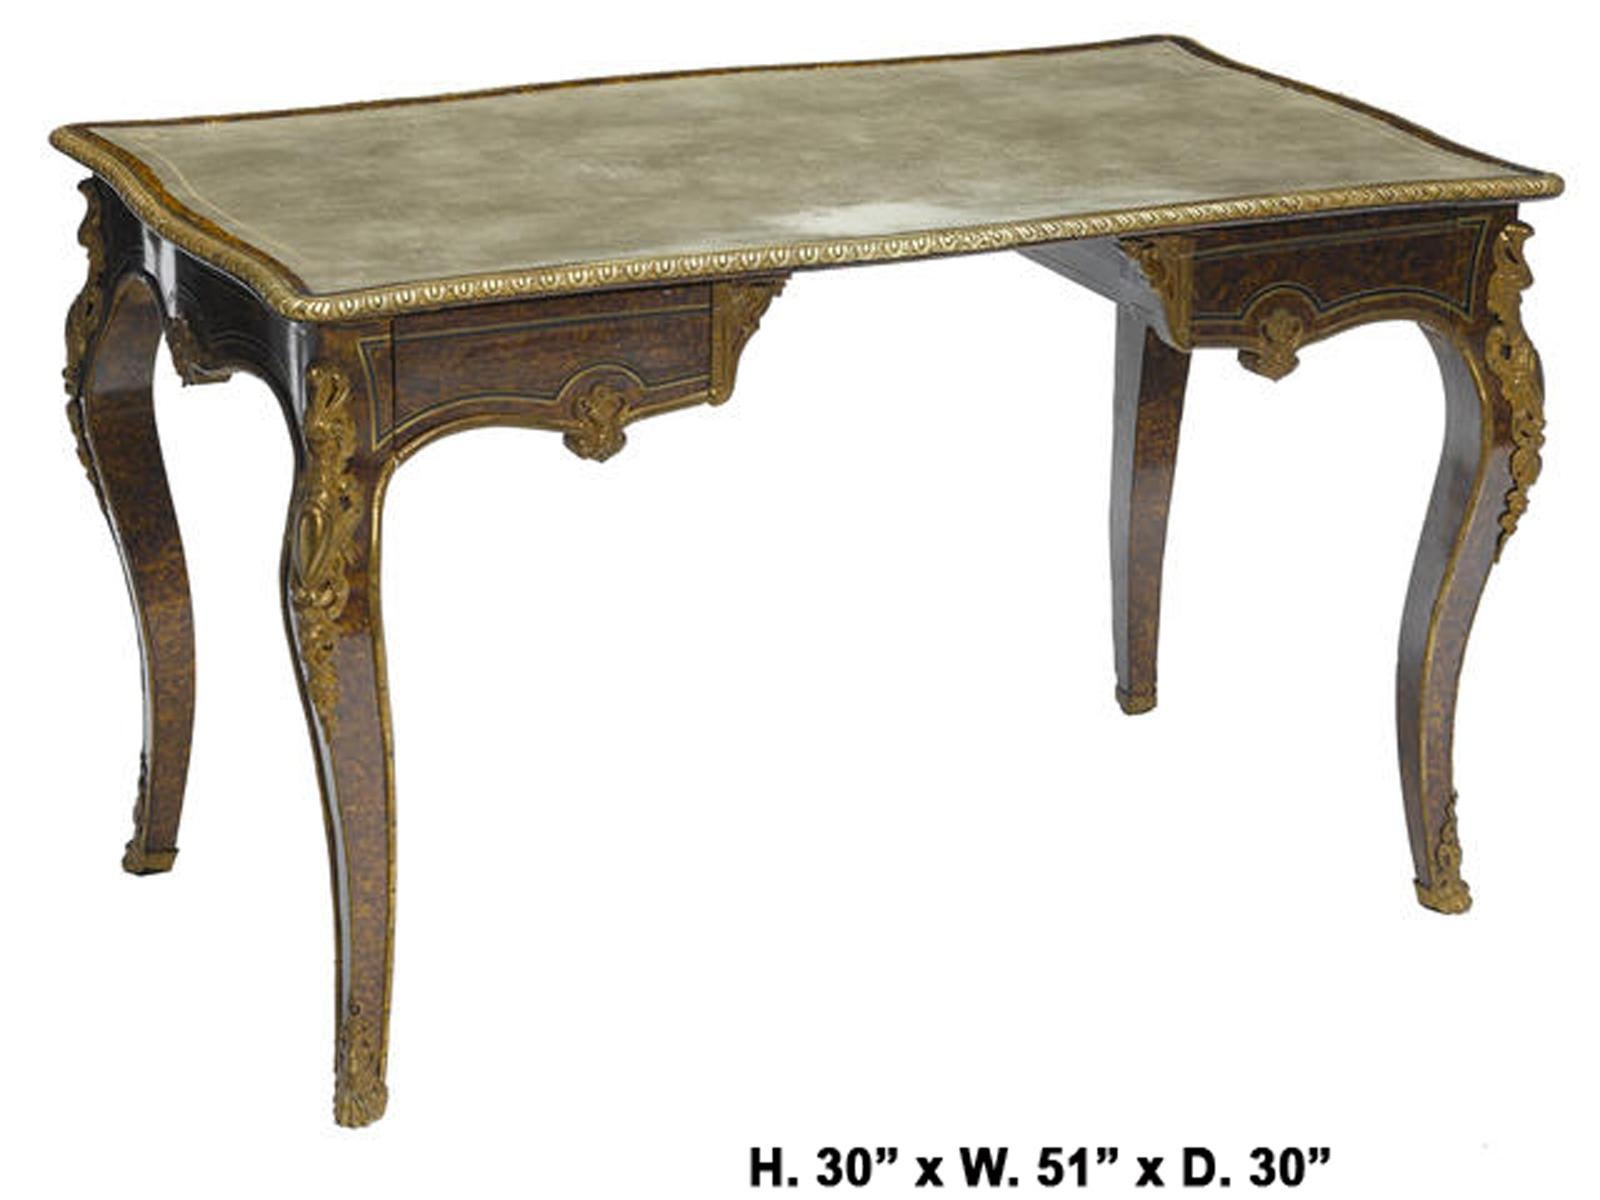 A unique French Louis XV style faux tortoise shell painted gilt bronze mounted bureau plat desk.
19th century. 

The shaped top is inset with a tooled writing surface and bordered with an egg and dart bronze trimming, above a uniquely shallow